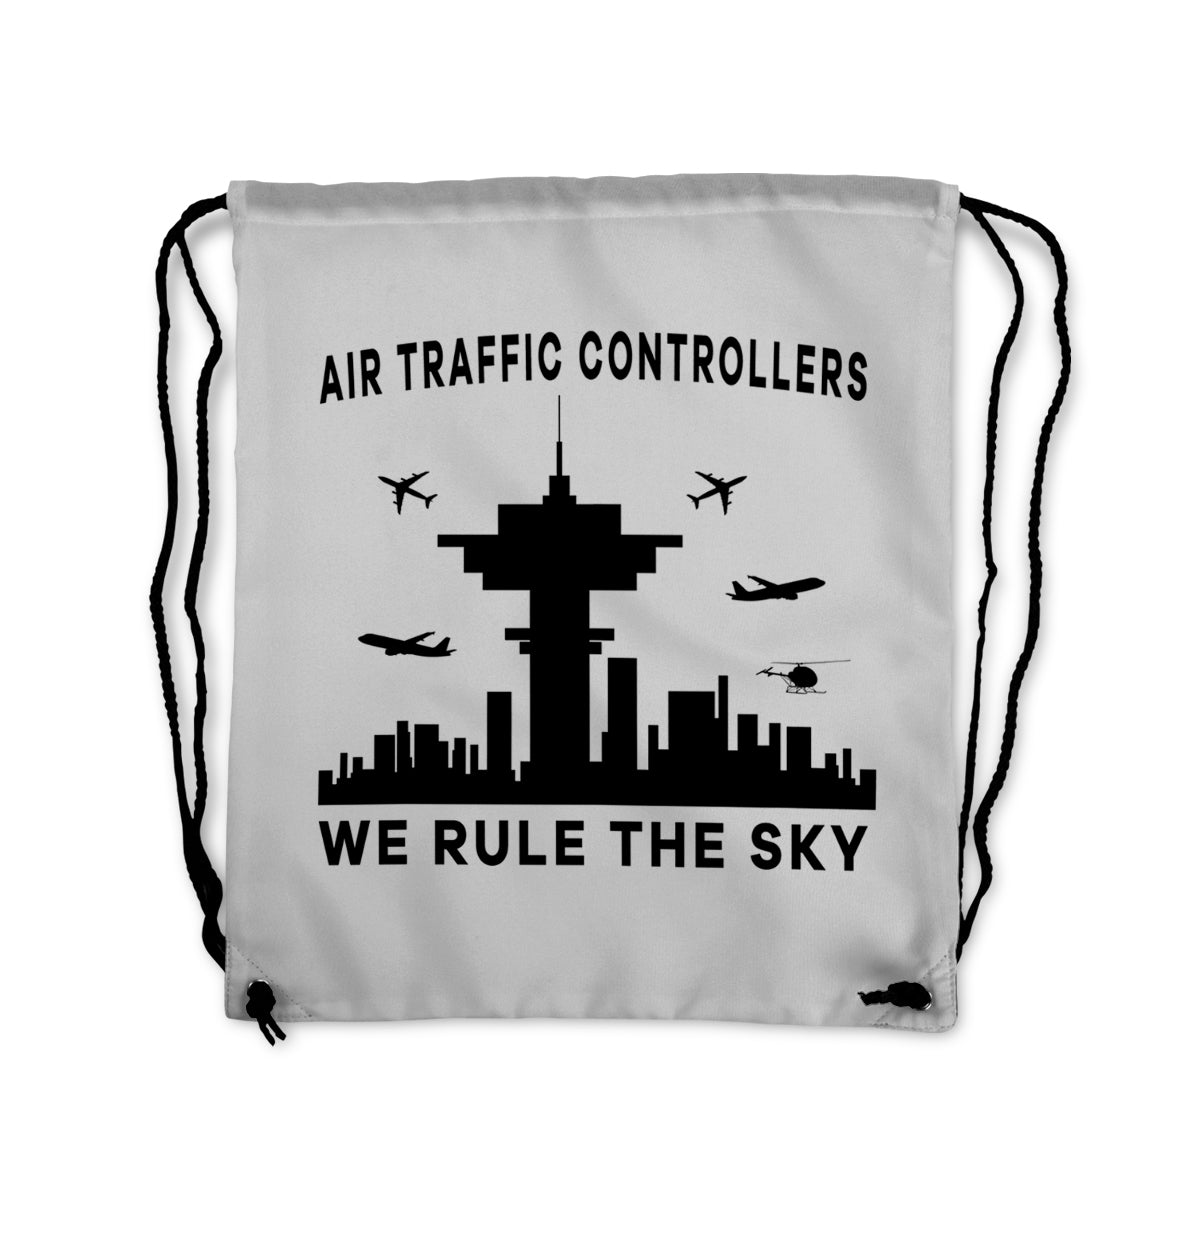 Air Traffic Controllers - We Rule The Sky Designed Drawstring Bags